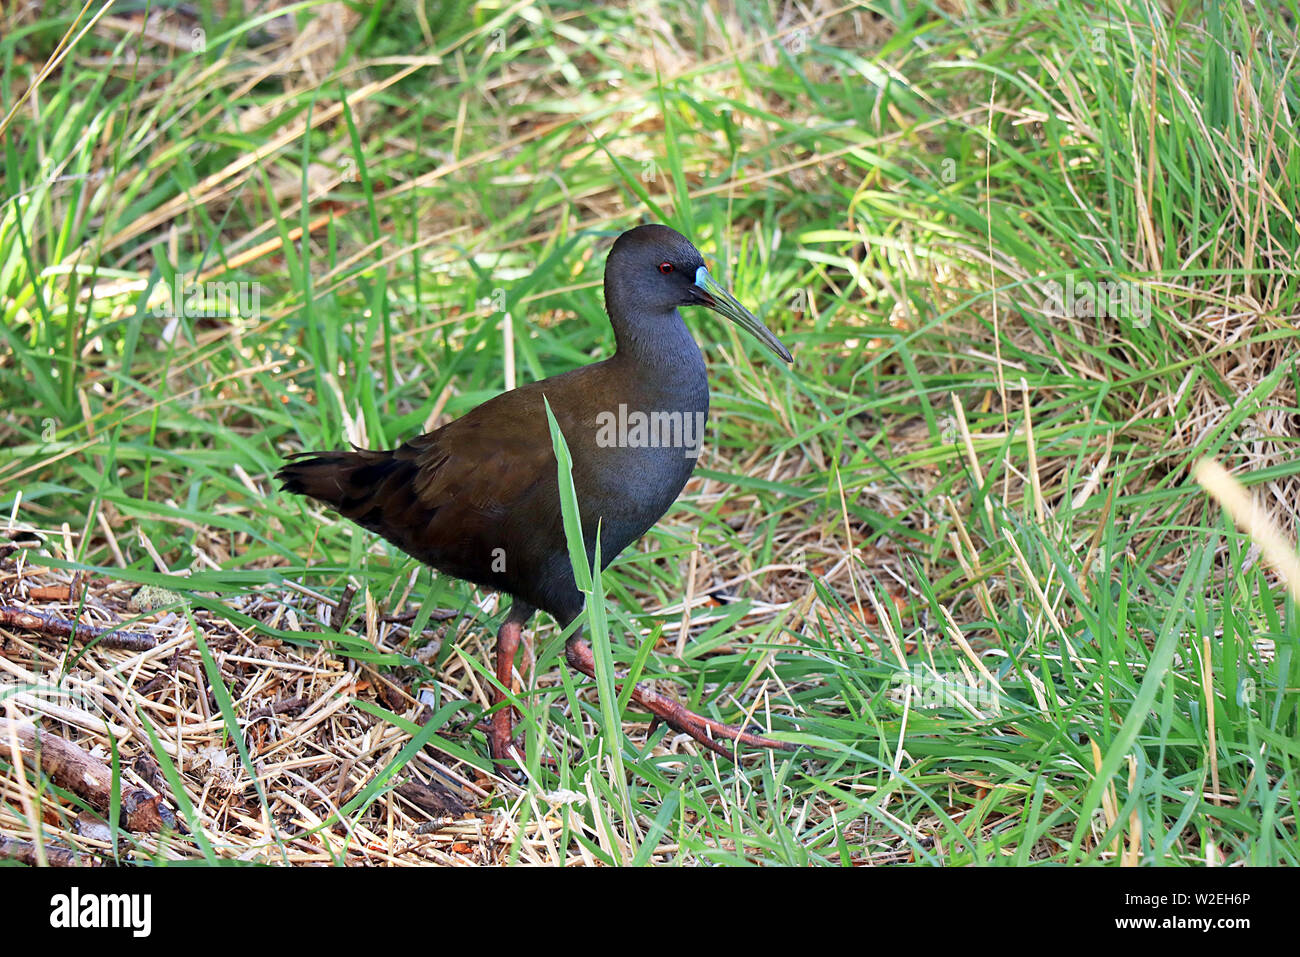 A wild plumbeous or cotuta rail (Pardirallus sanguinolentus) wading in grass by Lago Pehoe in the Torres del Paine National Park in Chilean Patagonia. Stock Photo